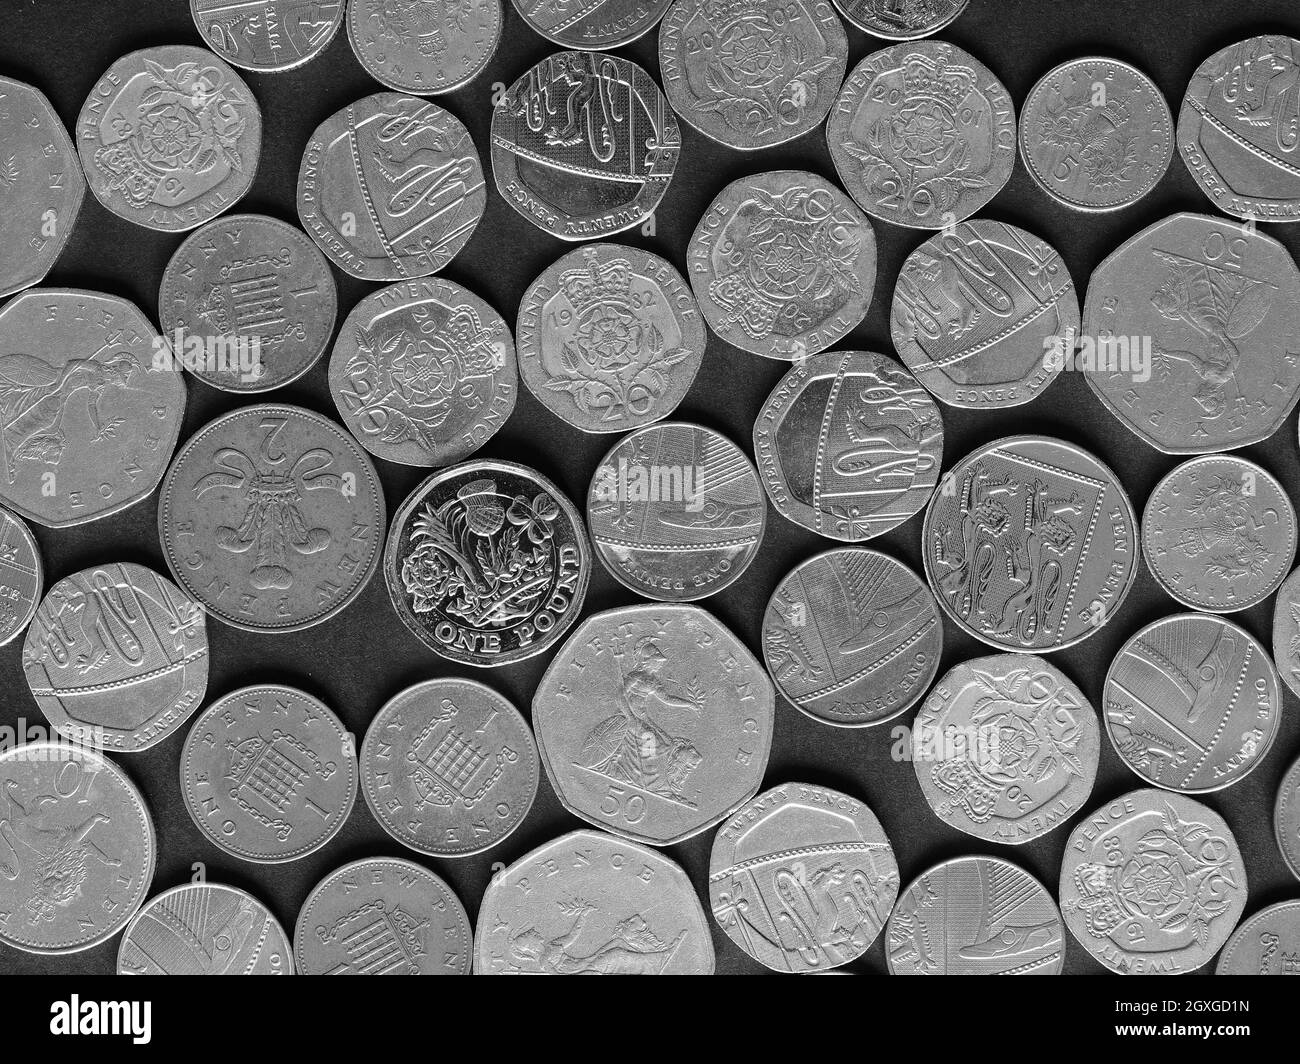 Pound coins money (GBP), currency of United Kingdom, over black background in black and white Stock Photo